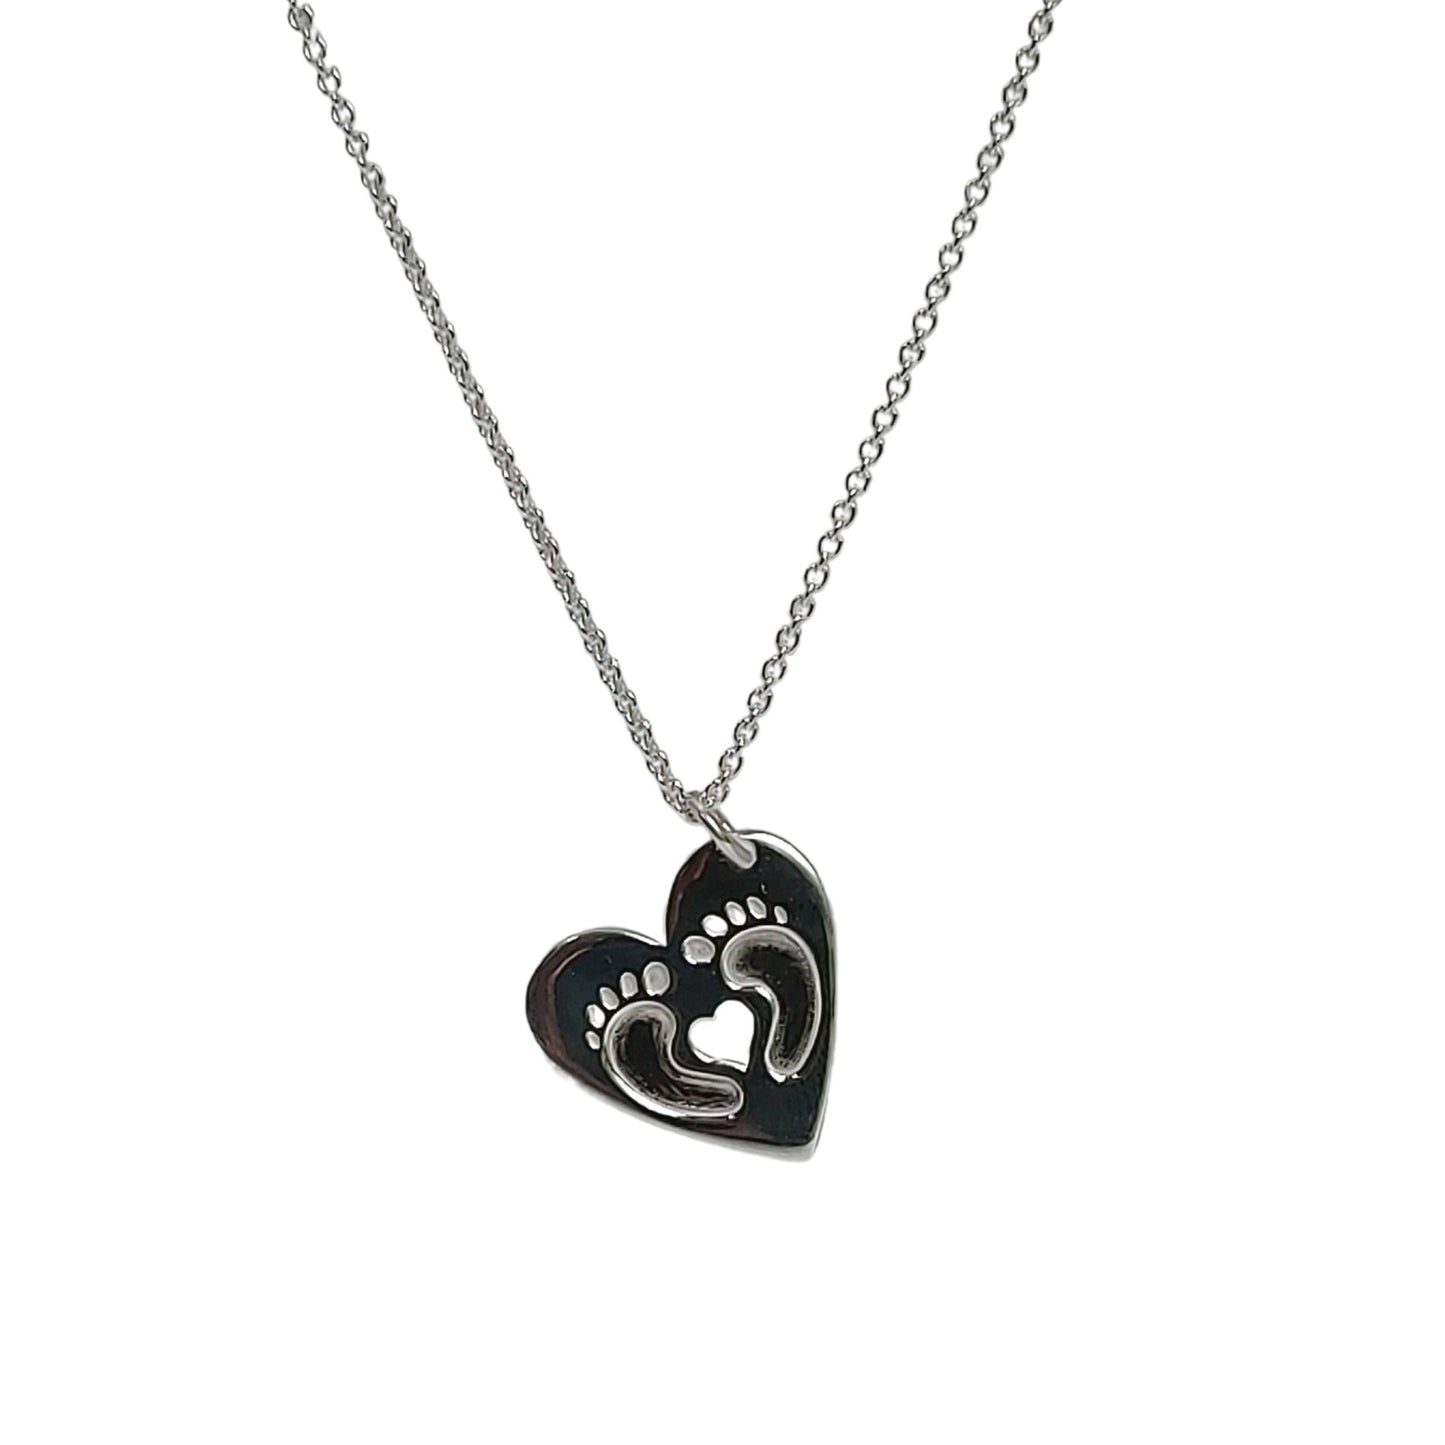 Sterling silver Clubfoot strong necklace with two tiny curled feet embossed into heart, and heart cut out in center